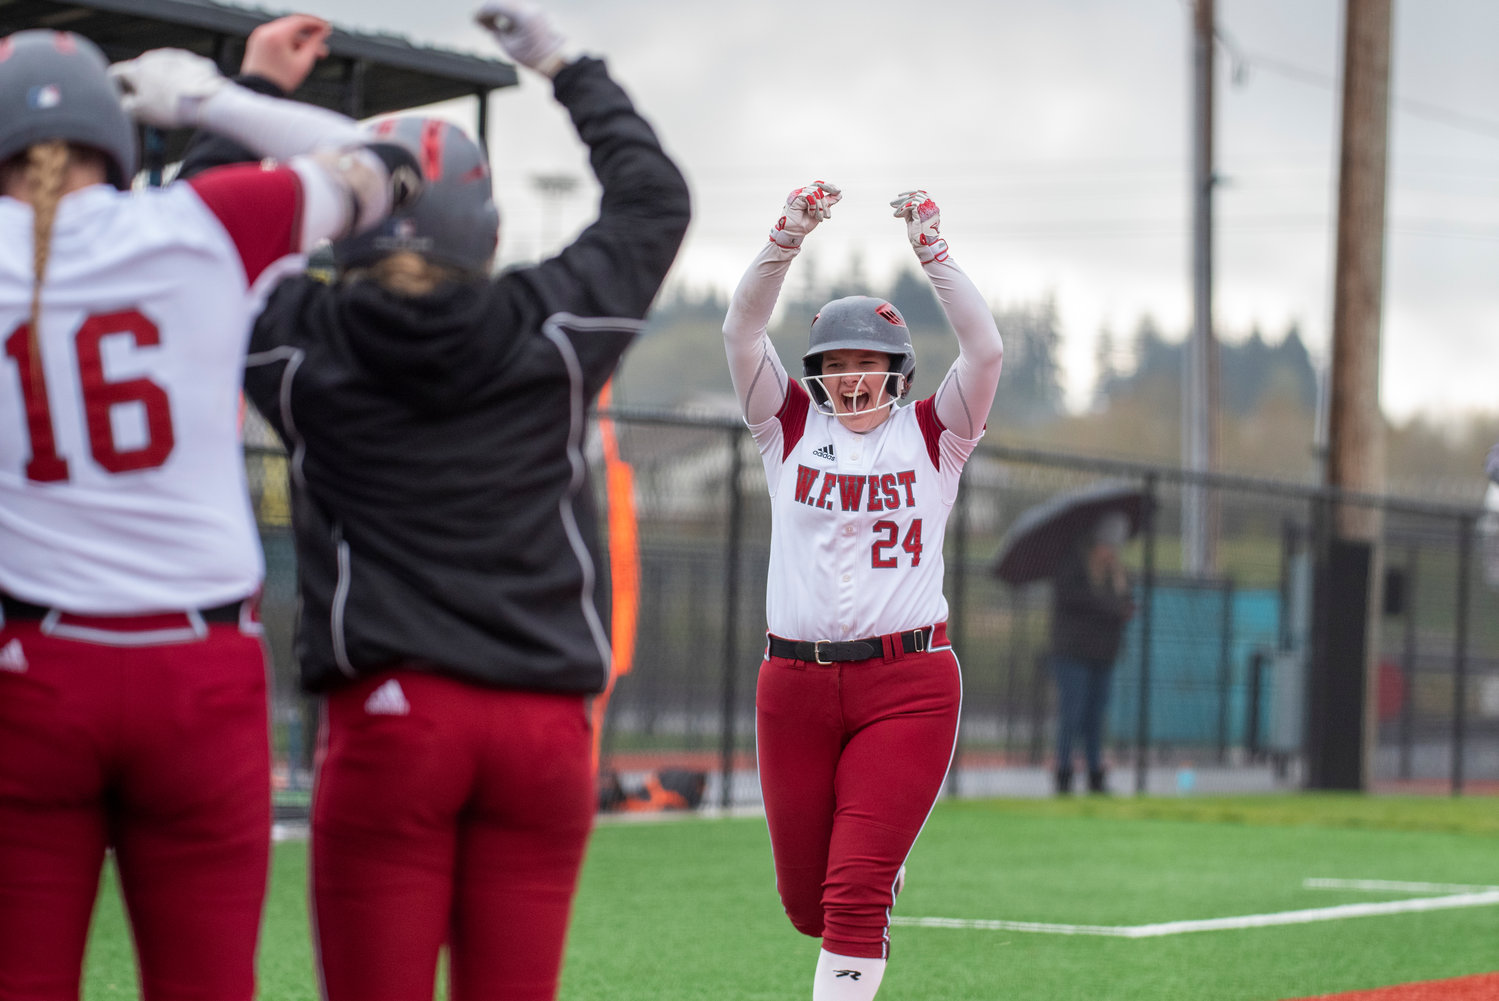 W.F. West's Savannah Hawkins throws her hand up in celebration as she's met at home plate after hitting a three-run homer against Rochester at home on Wednesday, April 13.